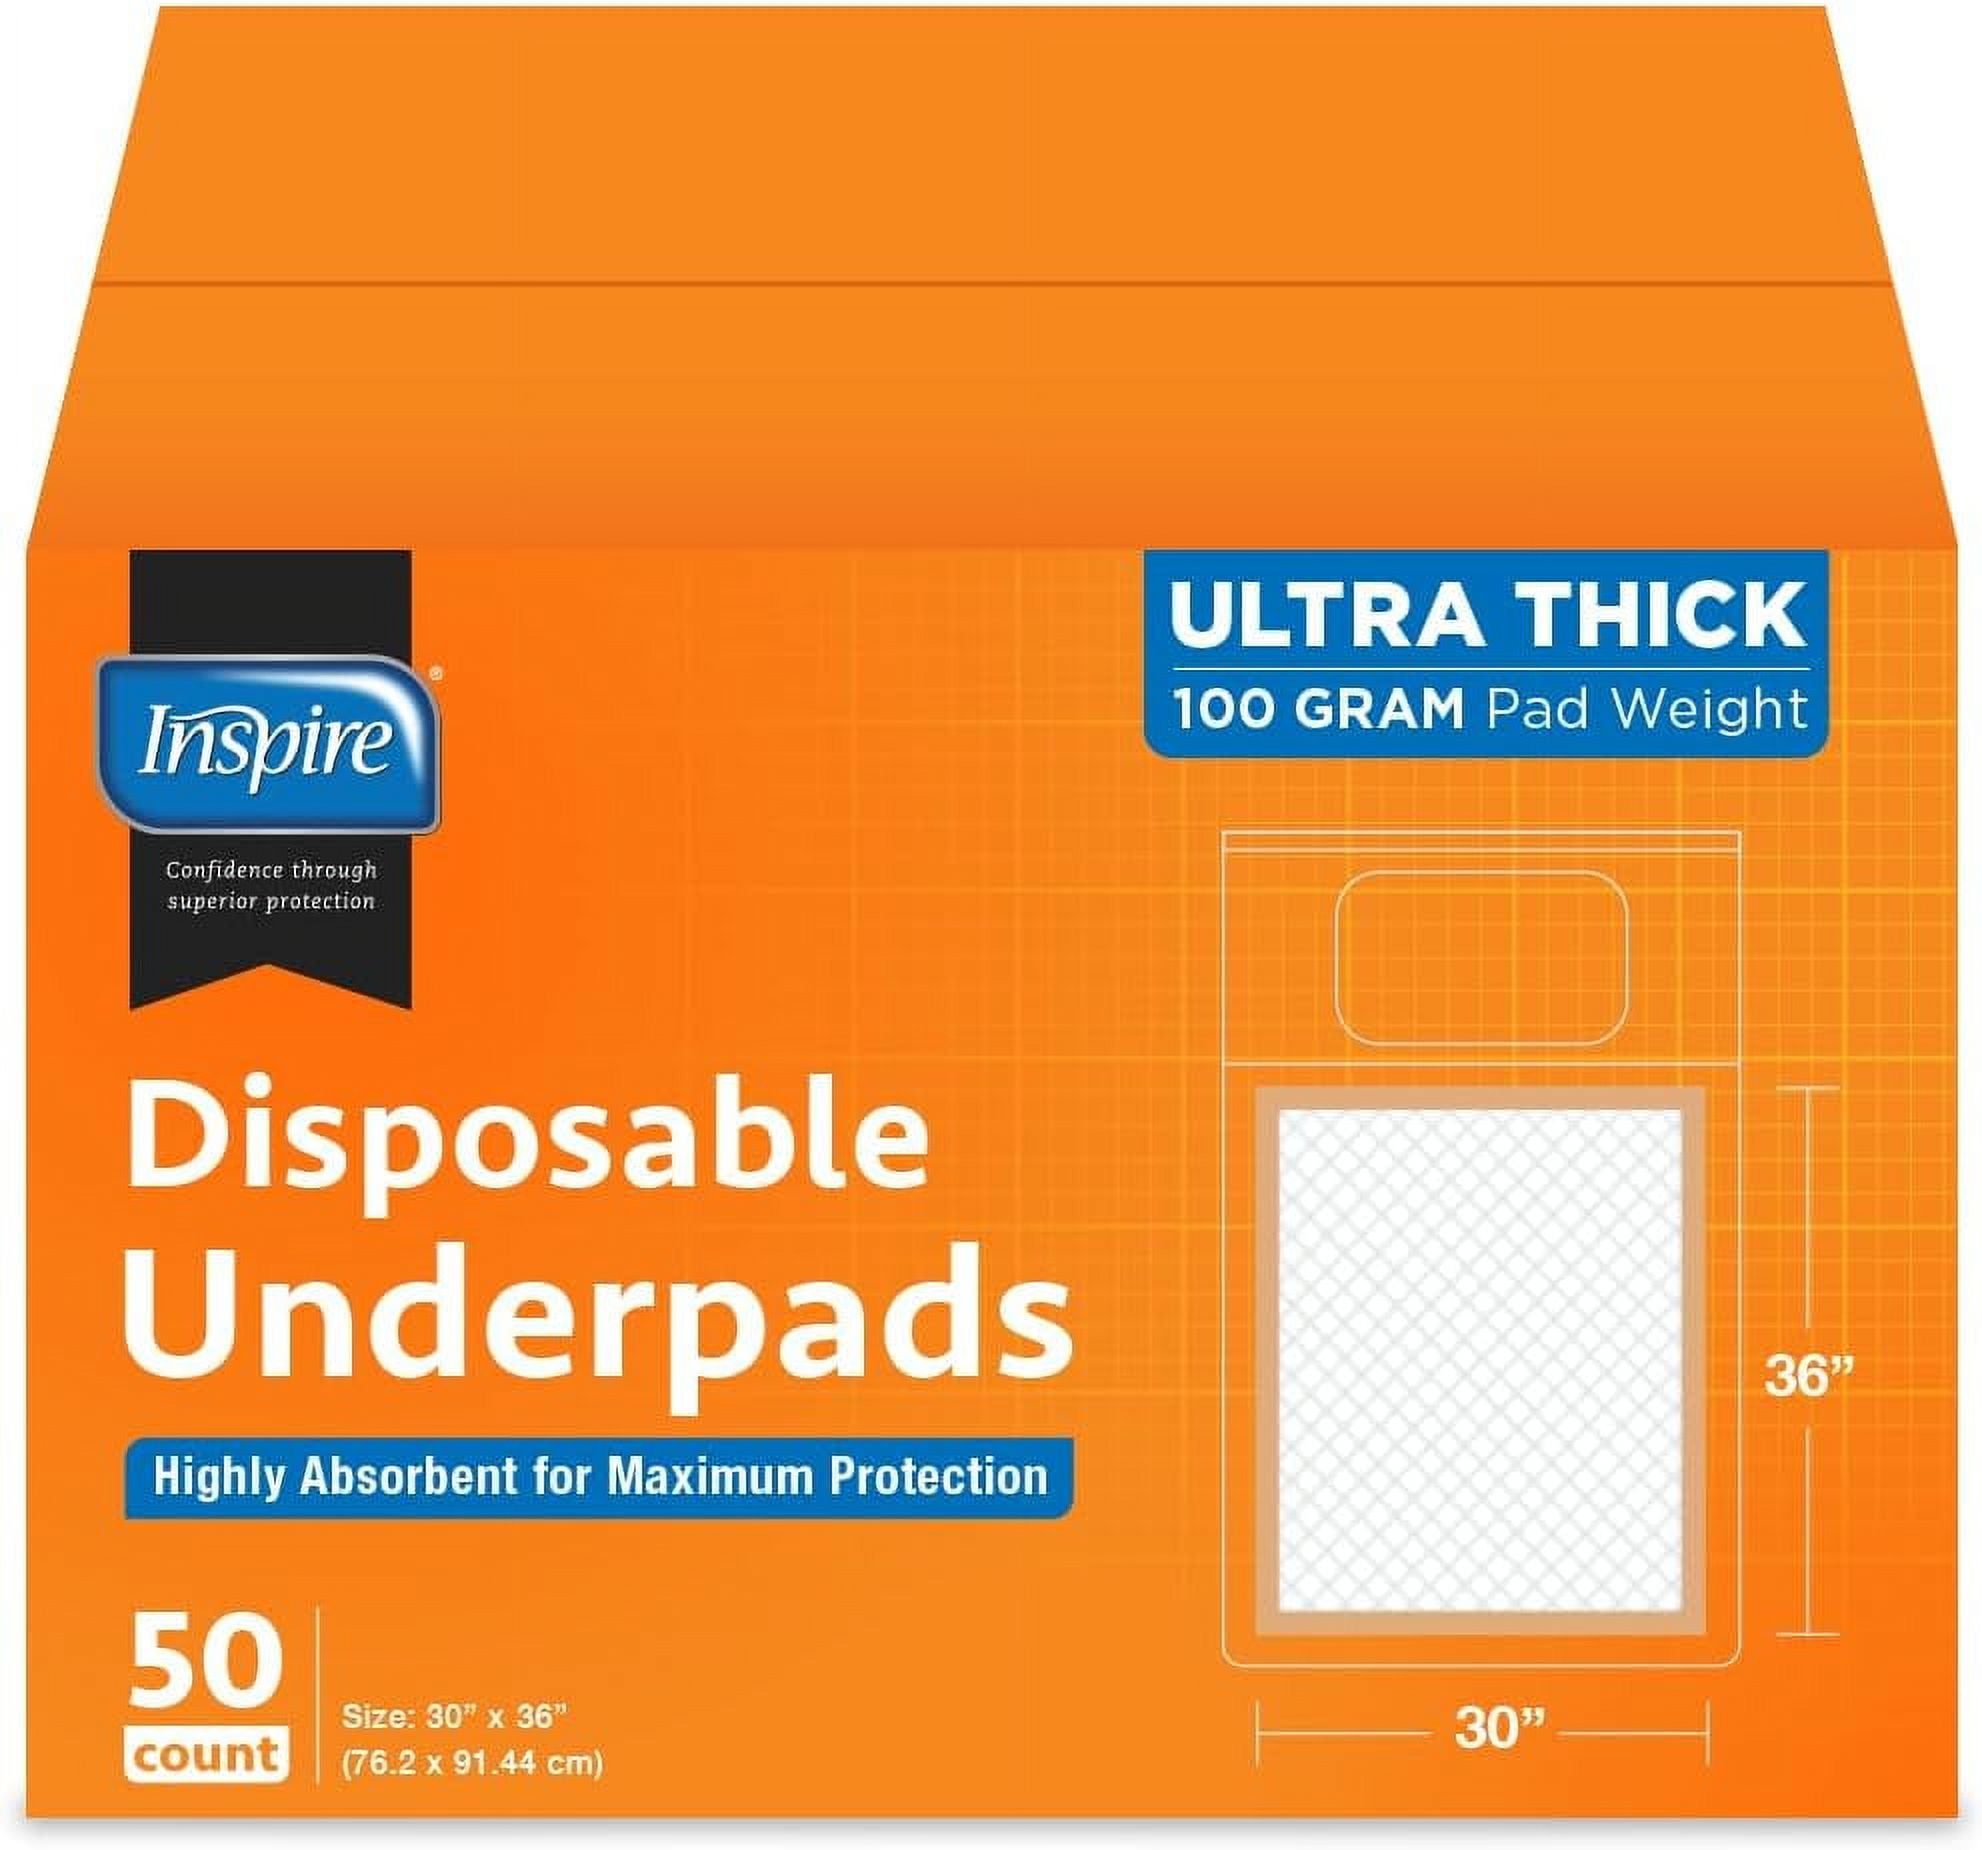 Inspire Absorbent Bed Pads for Incontinence Disposable XL 30 x 36 Super | The Peach Pad Ultra Thick & Absorbent 100 Grams 3G Sap Incontinence Bed Pads